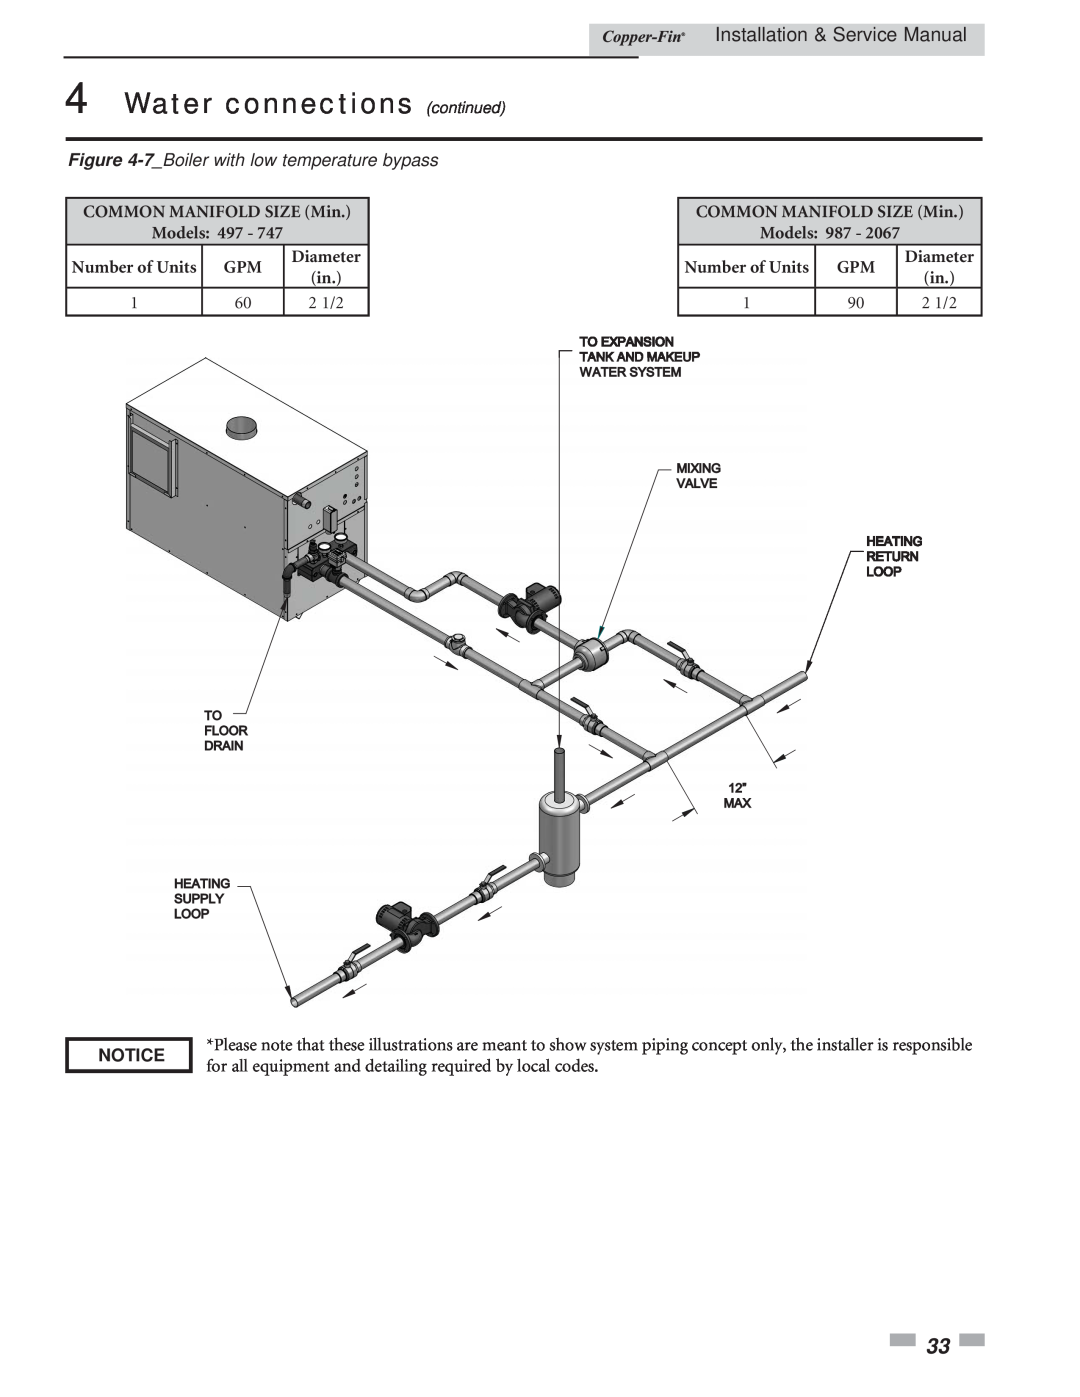 Lochinvar 497 - 2067 7_Boilerwith low temperature bypass, Water connections continued, Installation & Service Manual 